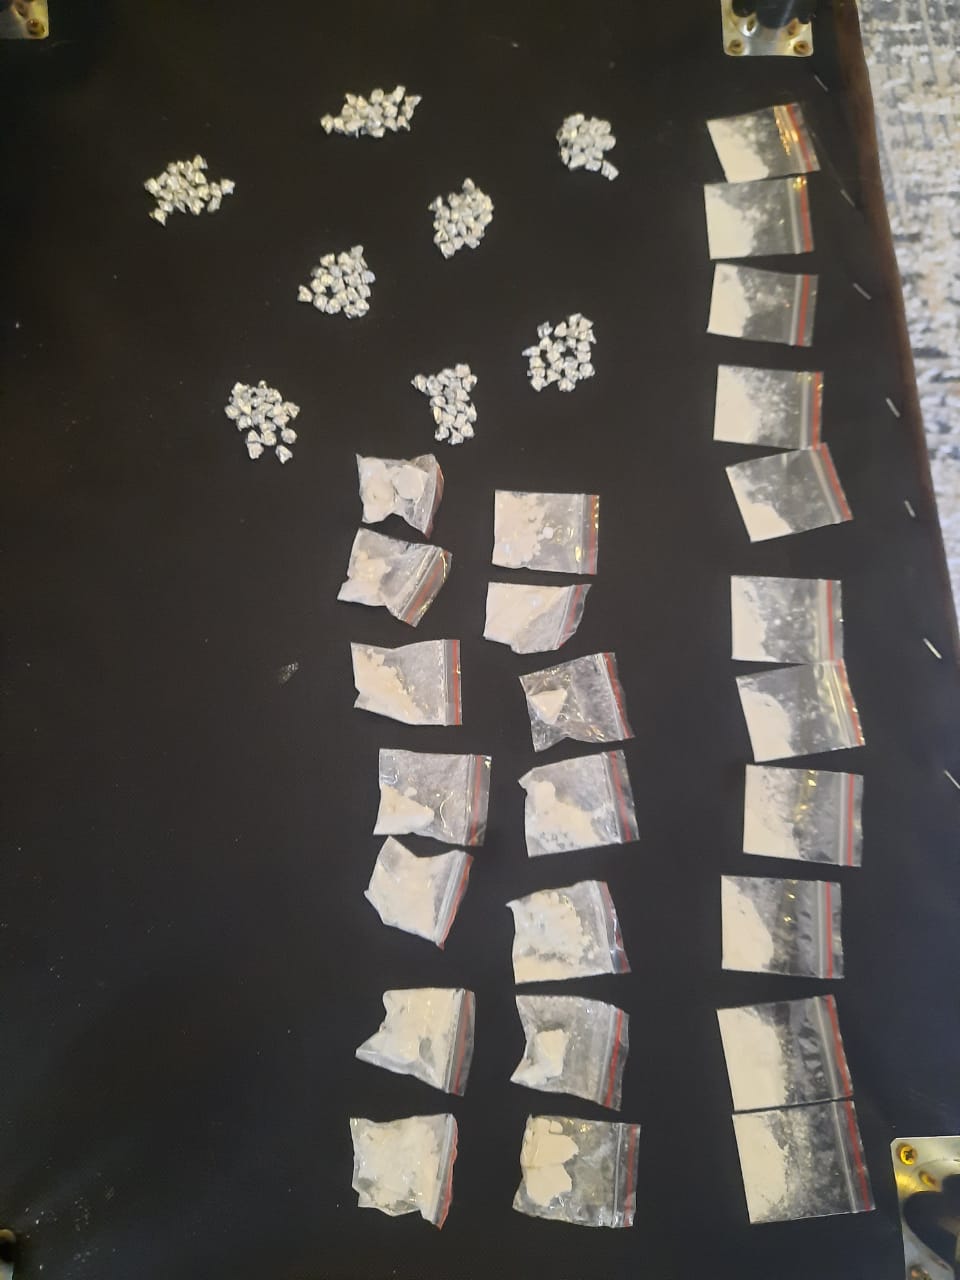 LIMPOPO ORGANISED CRIME UNIT APPREHEND ONE SUSPECT AND SEIZE DRUGS WORTH THOUSANDS OF RANDS IN POLOKWANE